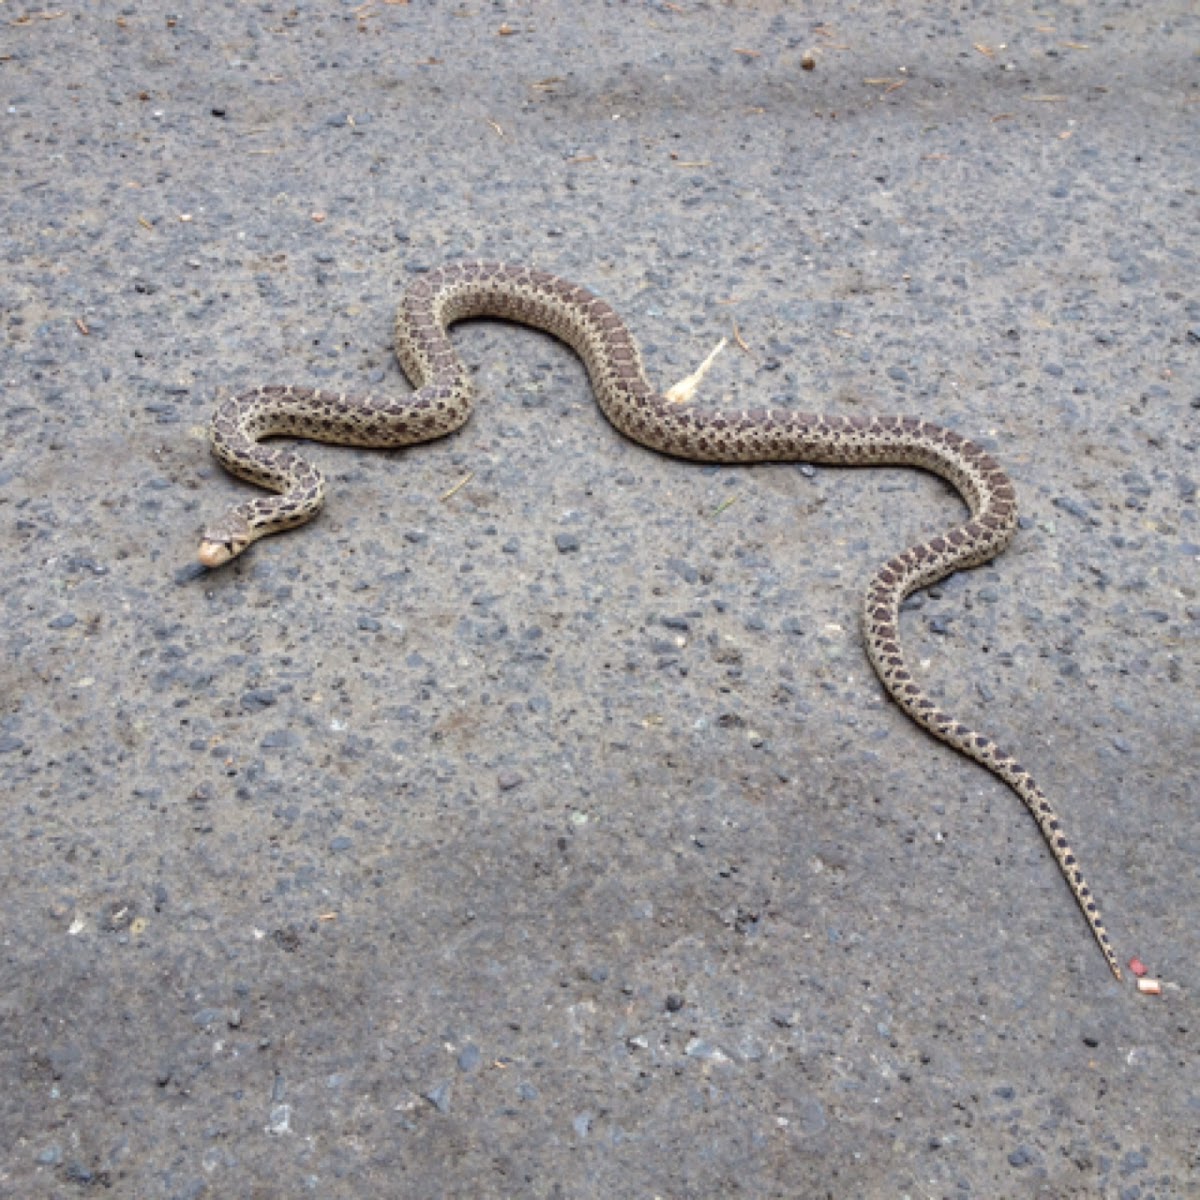 Pacific Gopher snake